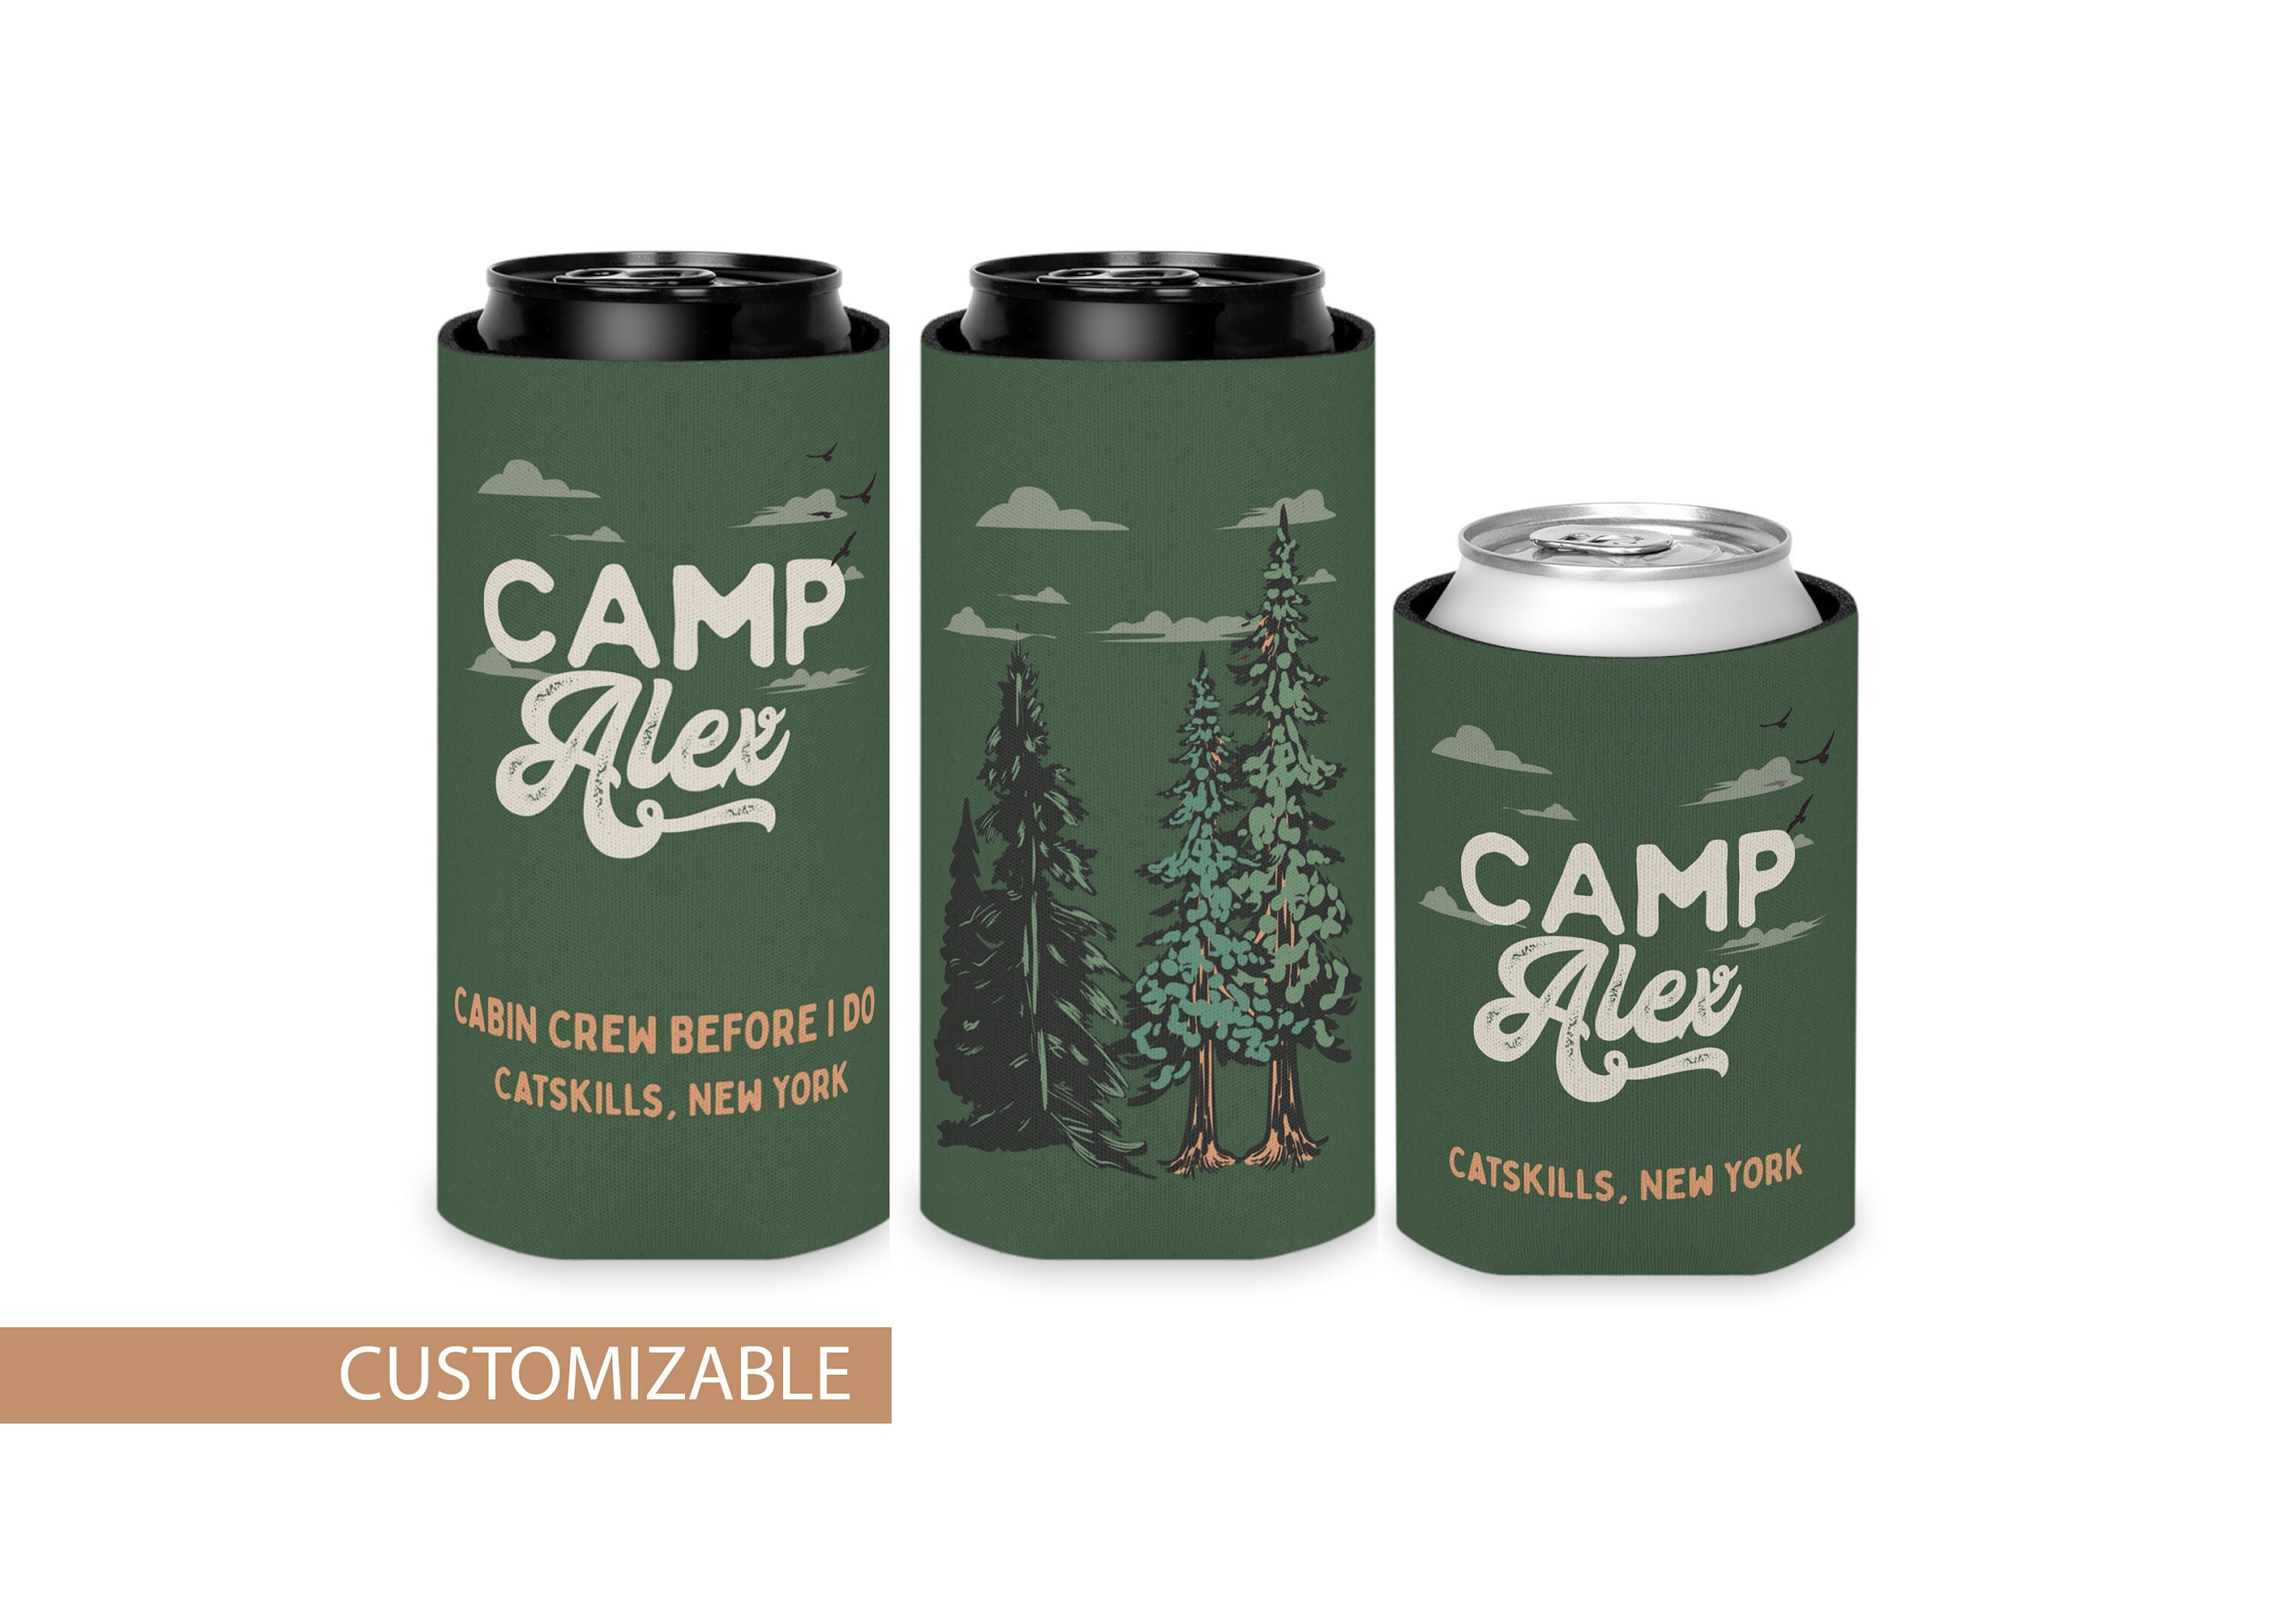 Outdoor Squad Personalized Slim Seltzer Koozie, Engraved Camping